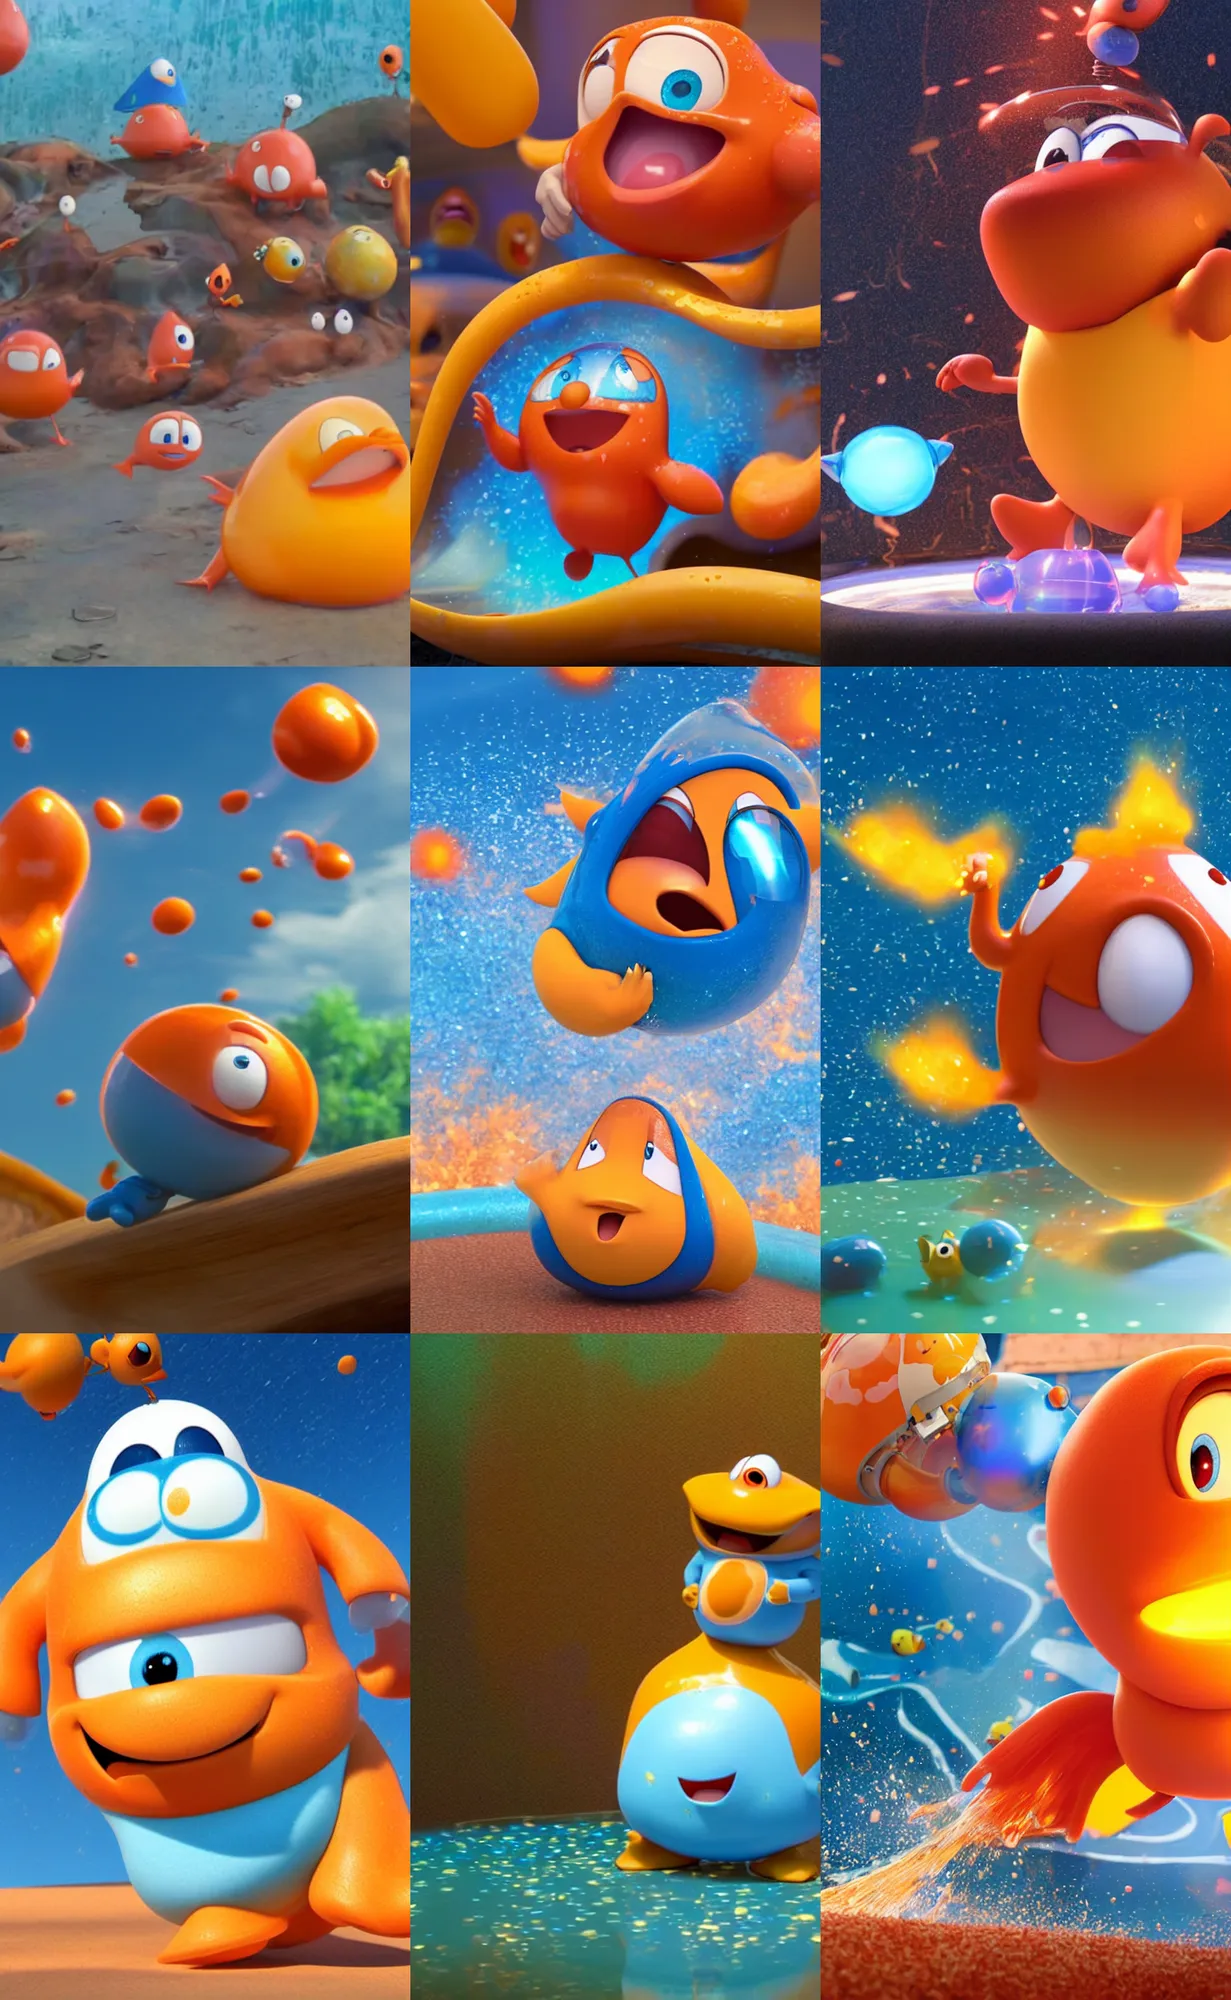 Prompt: waddle dee exploding fluid body, pixar illumination studios movie by john lasseter, exploding liquid slimy material, cinematic wide angle